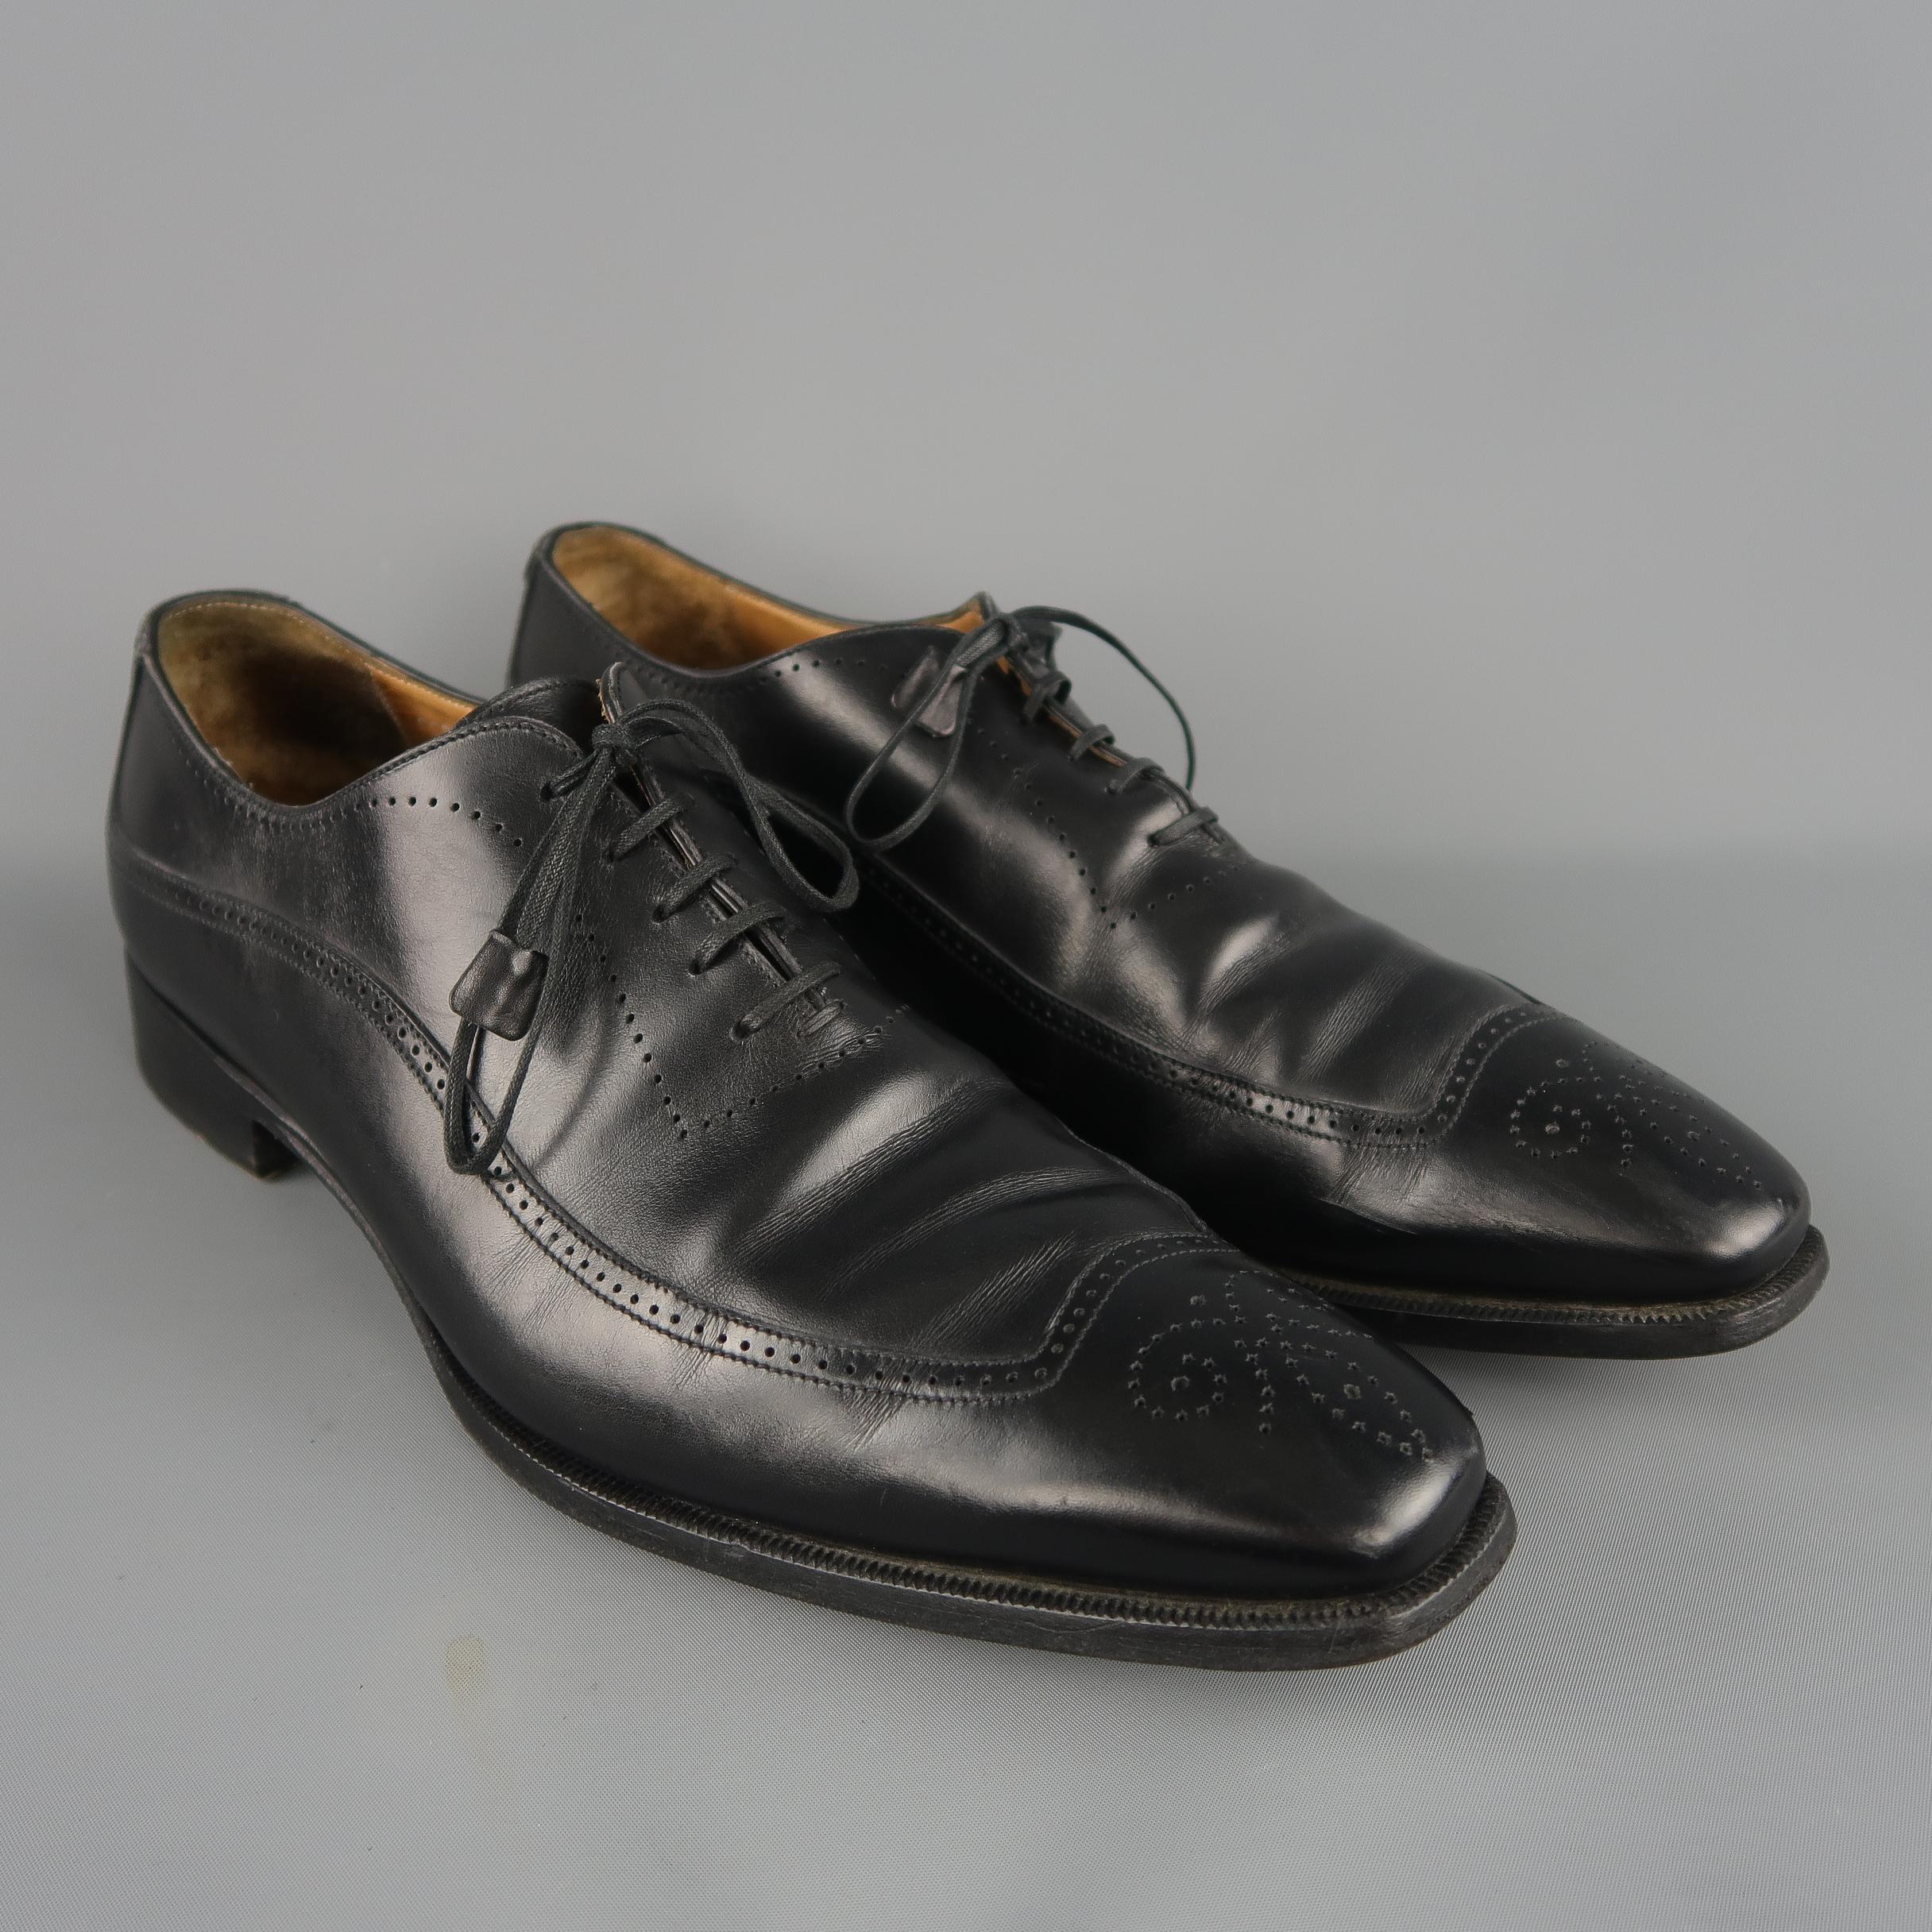 Franceschetti dress shoes come in smooth leather with perforated brogue details and medallion toe. Handmade in Italy.
 
Good Pre-Owned Condition.
Marked: IT 45